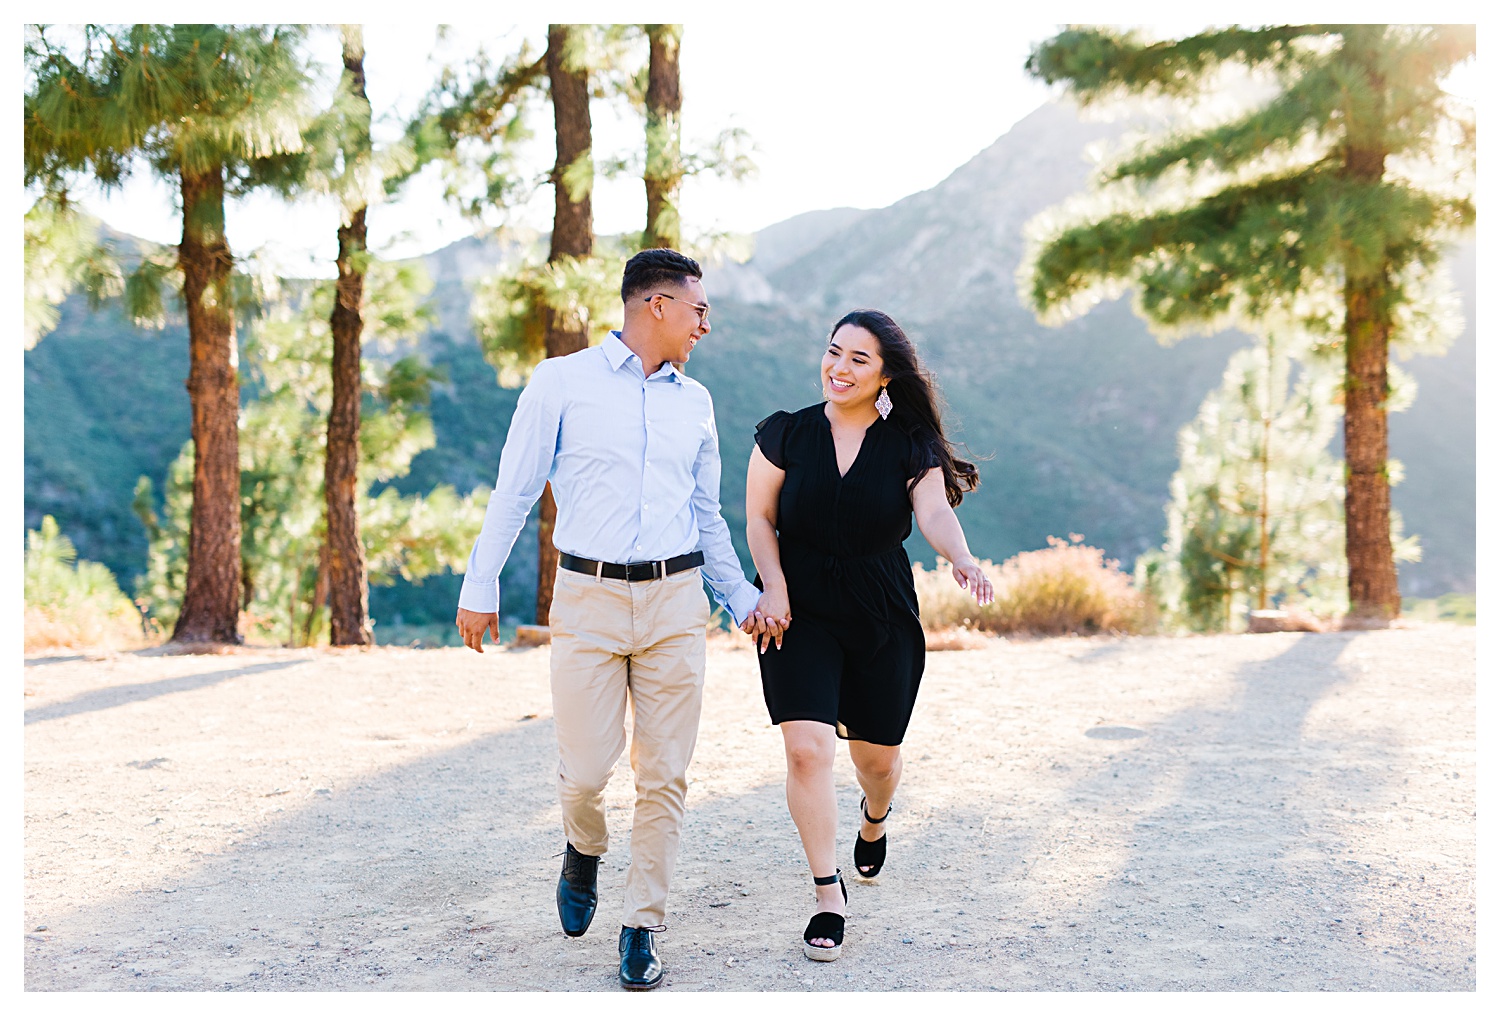 Angeles National Forest Engagement Photos couple running in forest together